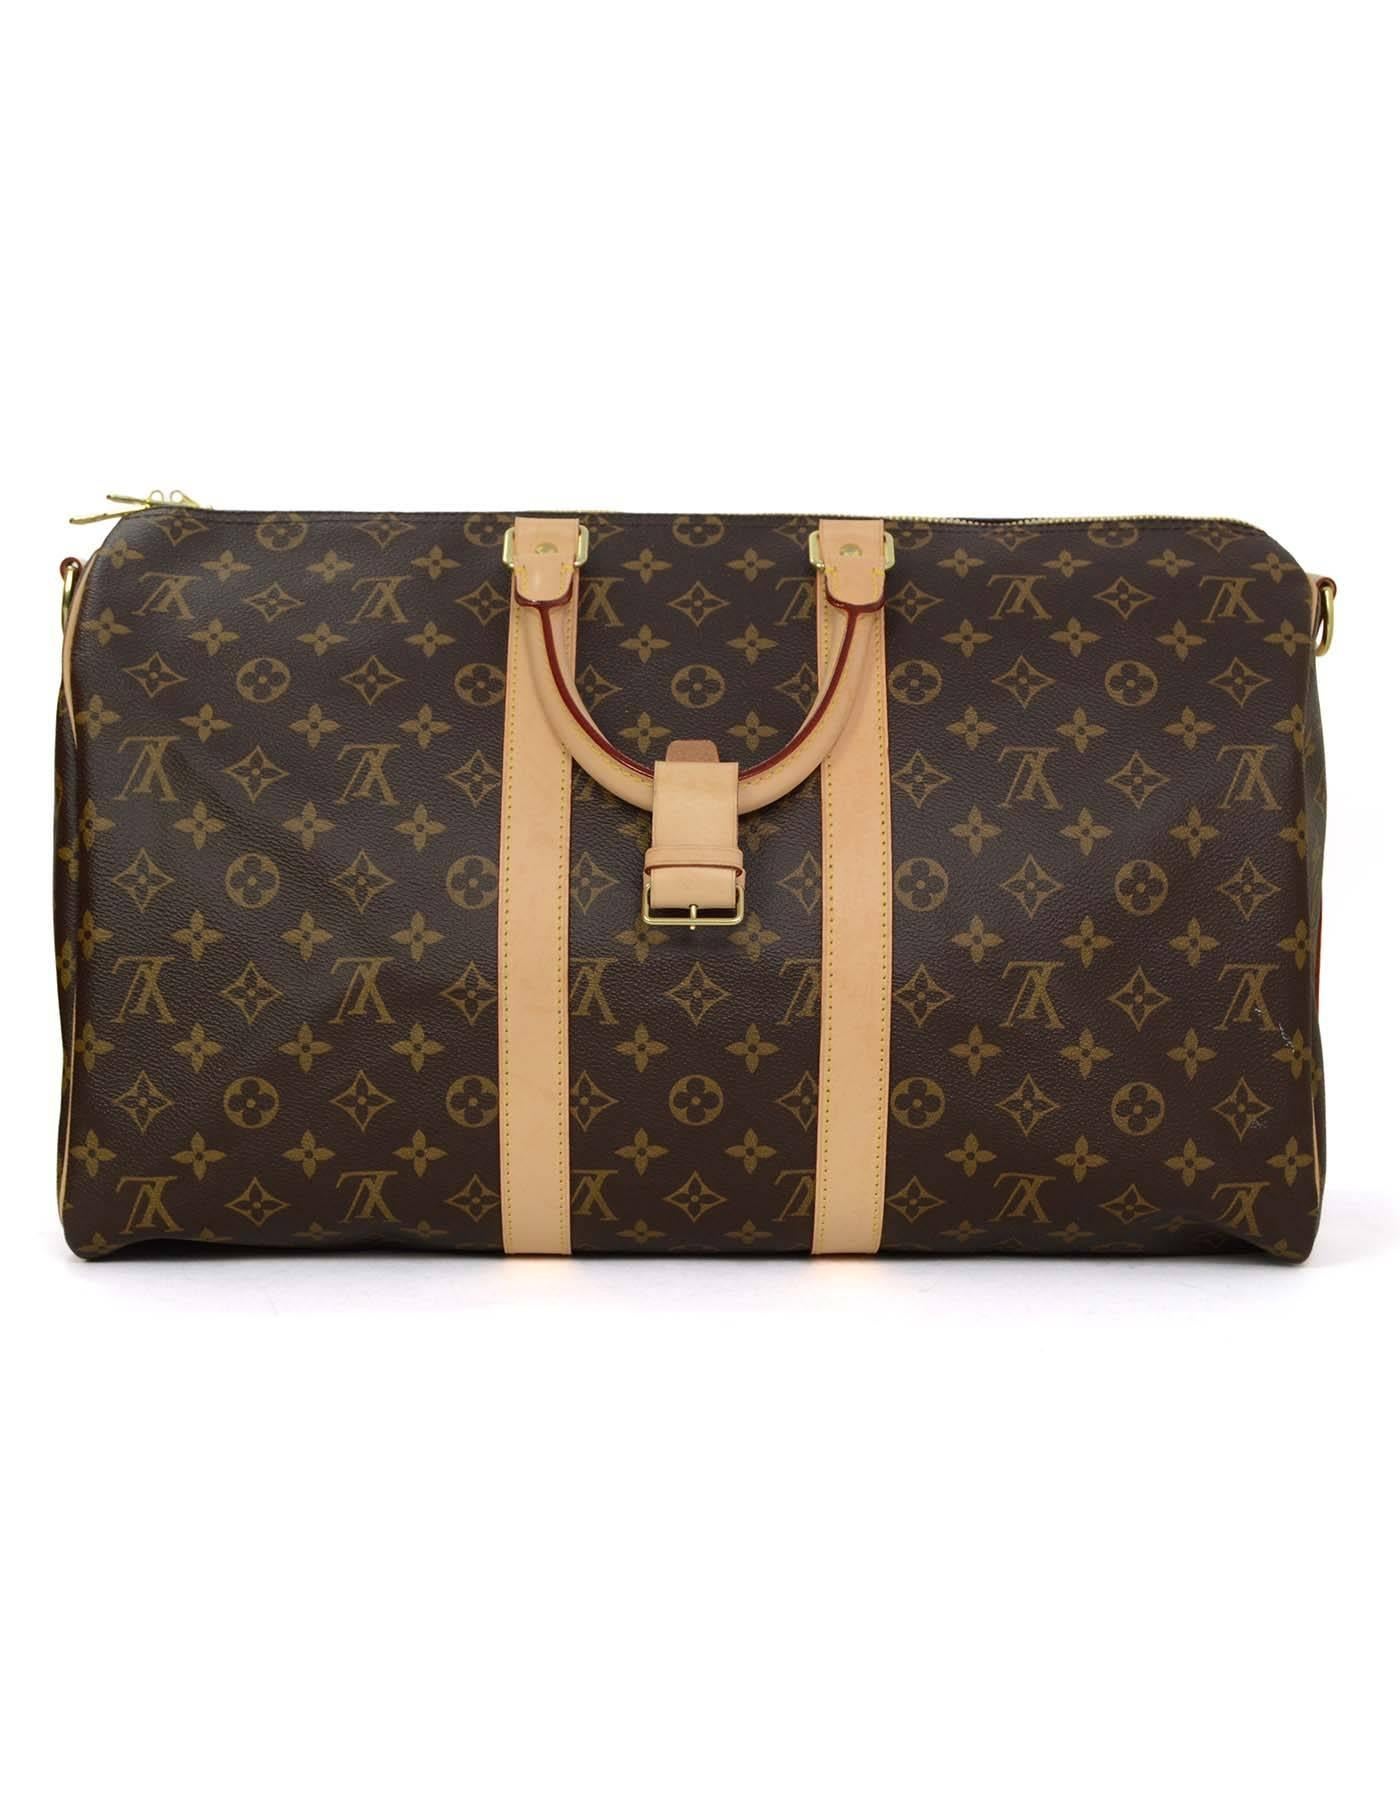 Louis Vuitton Monogram Keepall Bandouliere 45
Features optional shoulder/crossbody strap
Made In: USA
Year of Production: 2016
Color: Brown and tan
Hardware: Goldtone
Materials: Coated canvas and leather
Lining: Brown canvas
Closure/Opening: